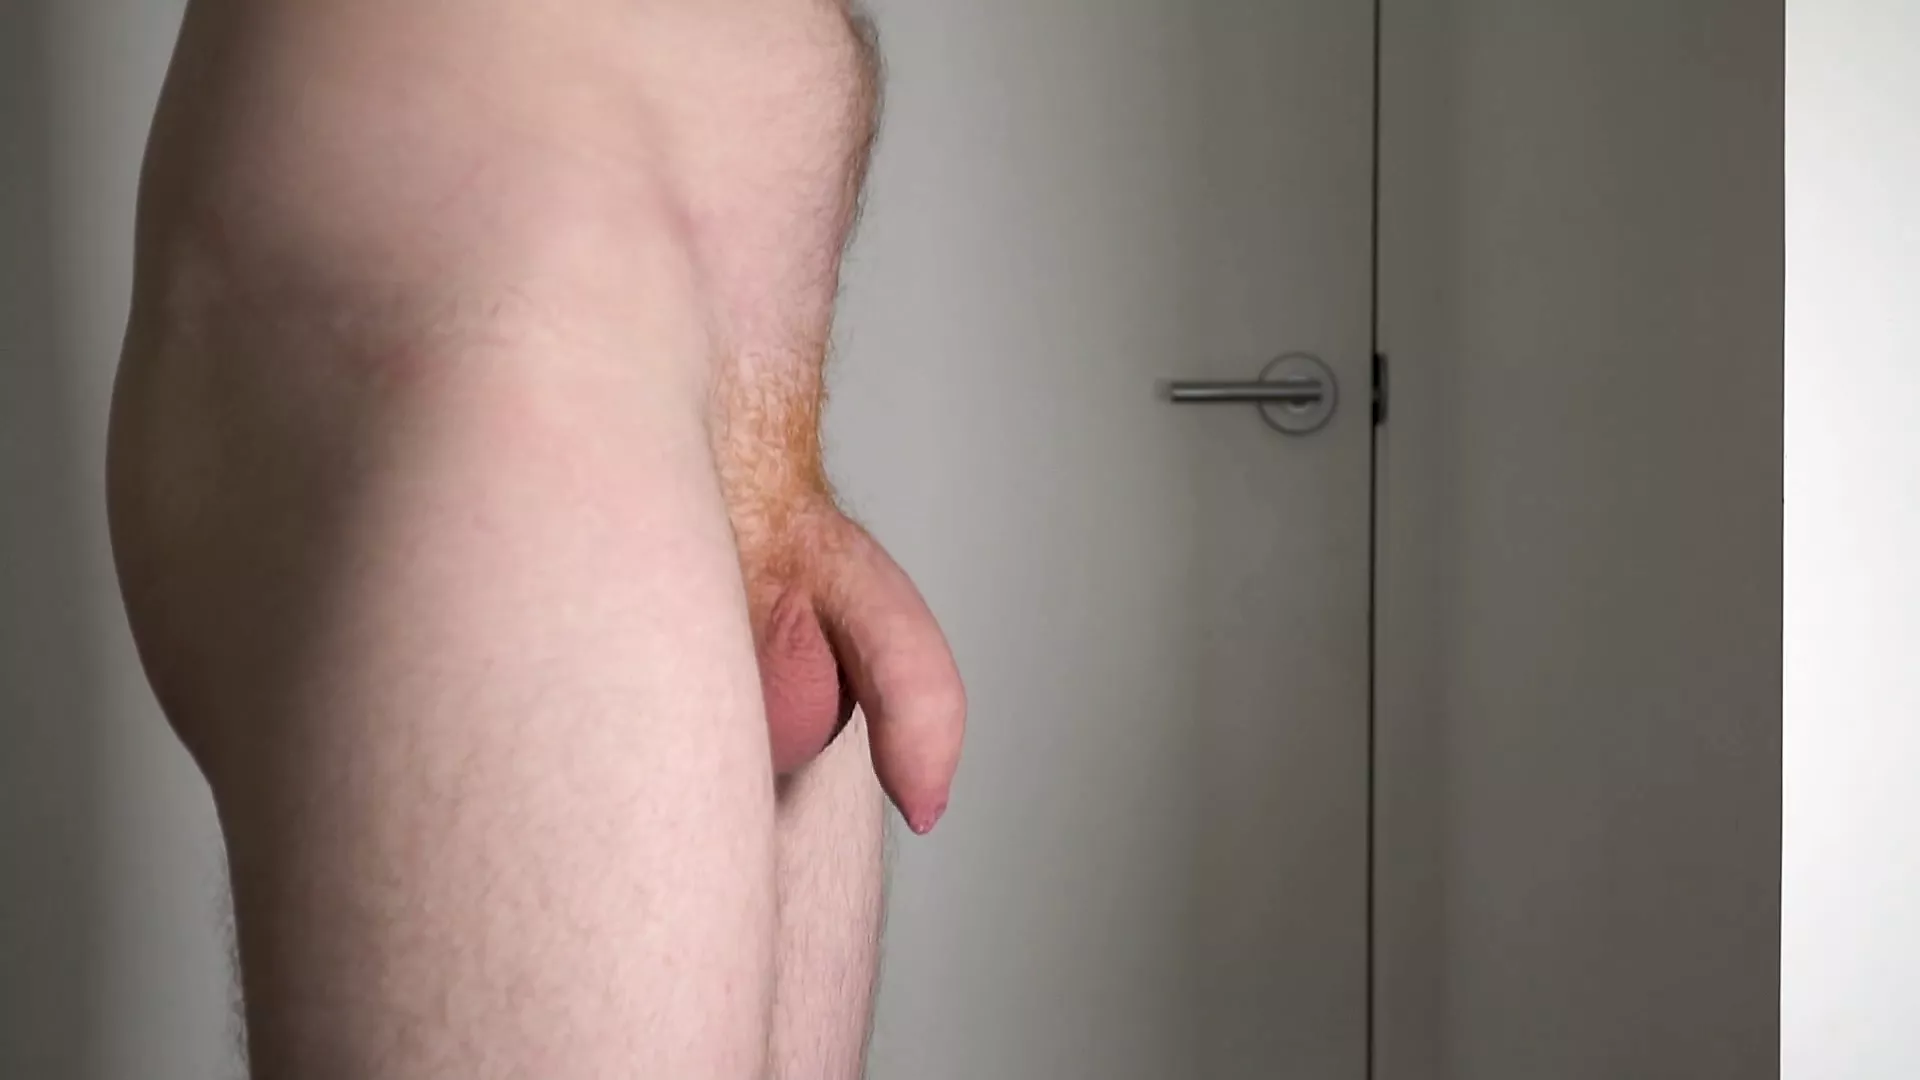 Bouncing Uncut Cock Soft to Hard pic